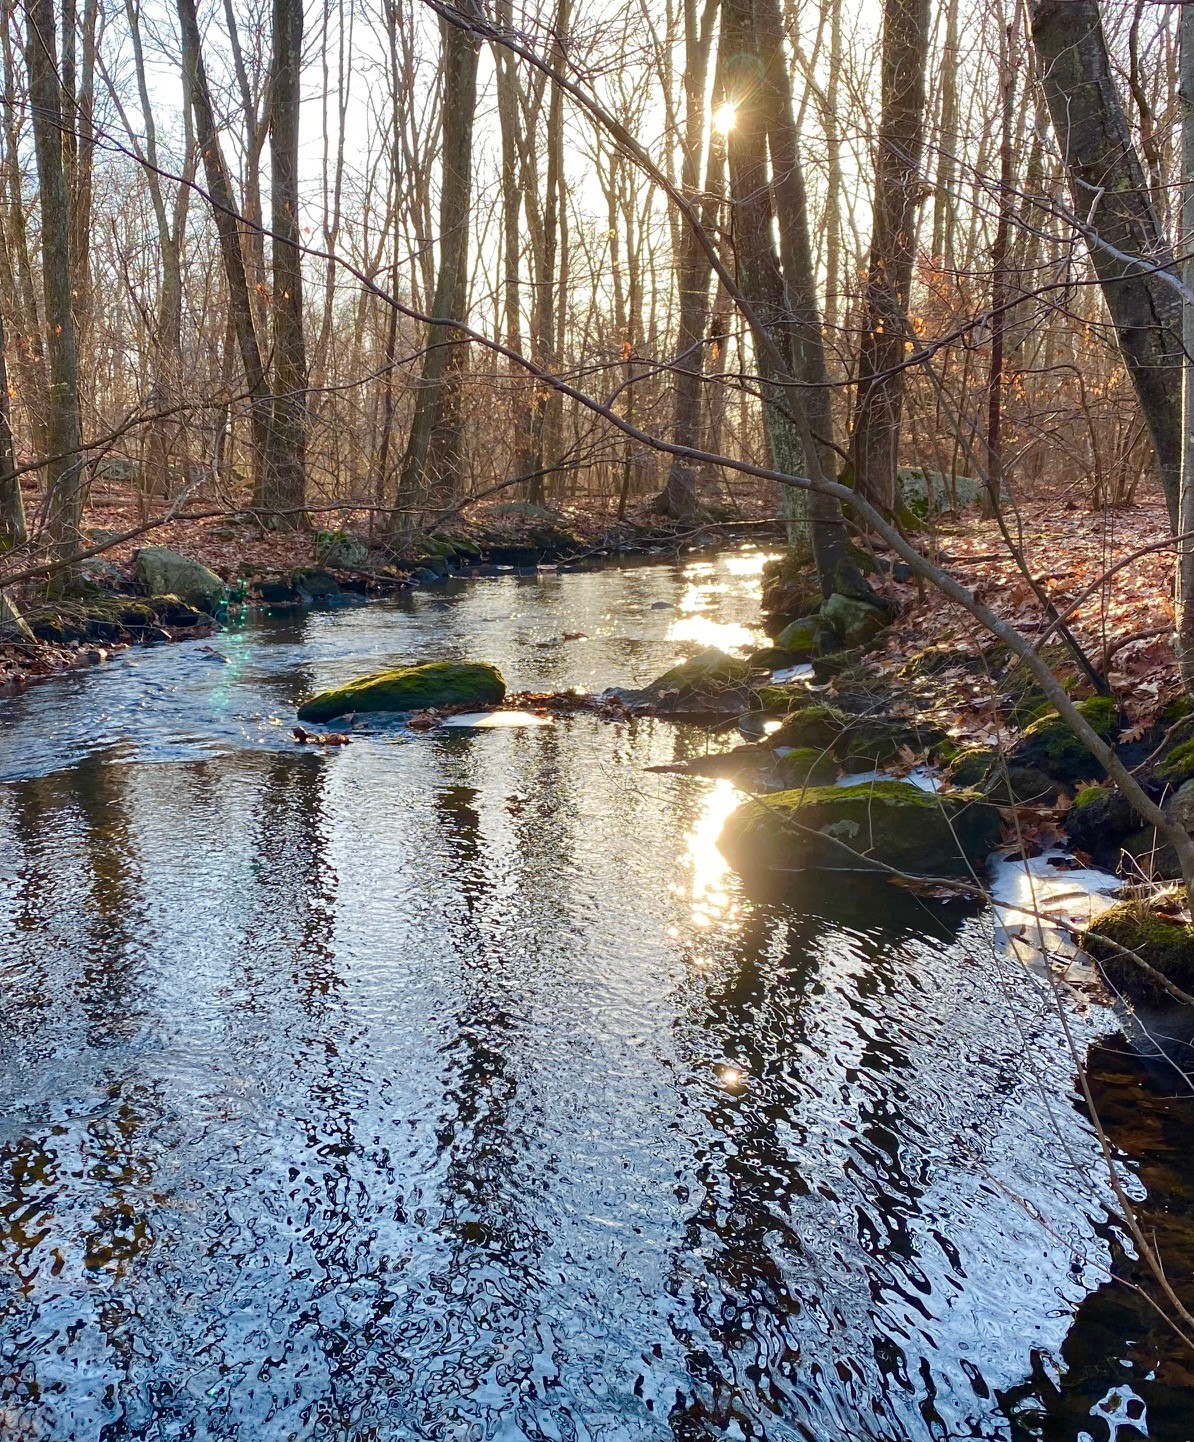 Sunlight sparkles on a small river passing through oak woods in winter.